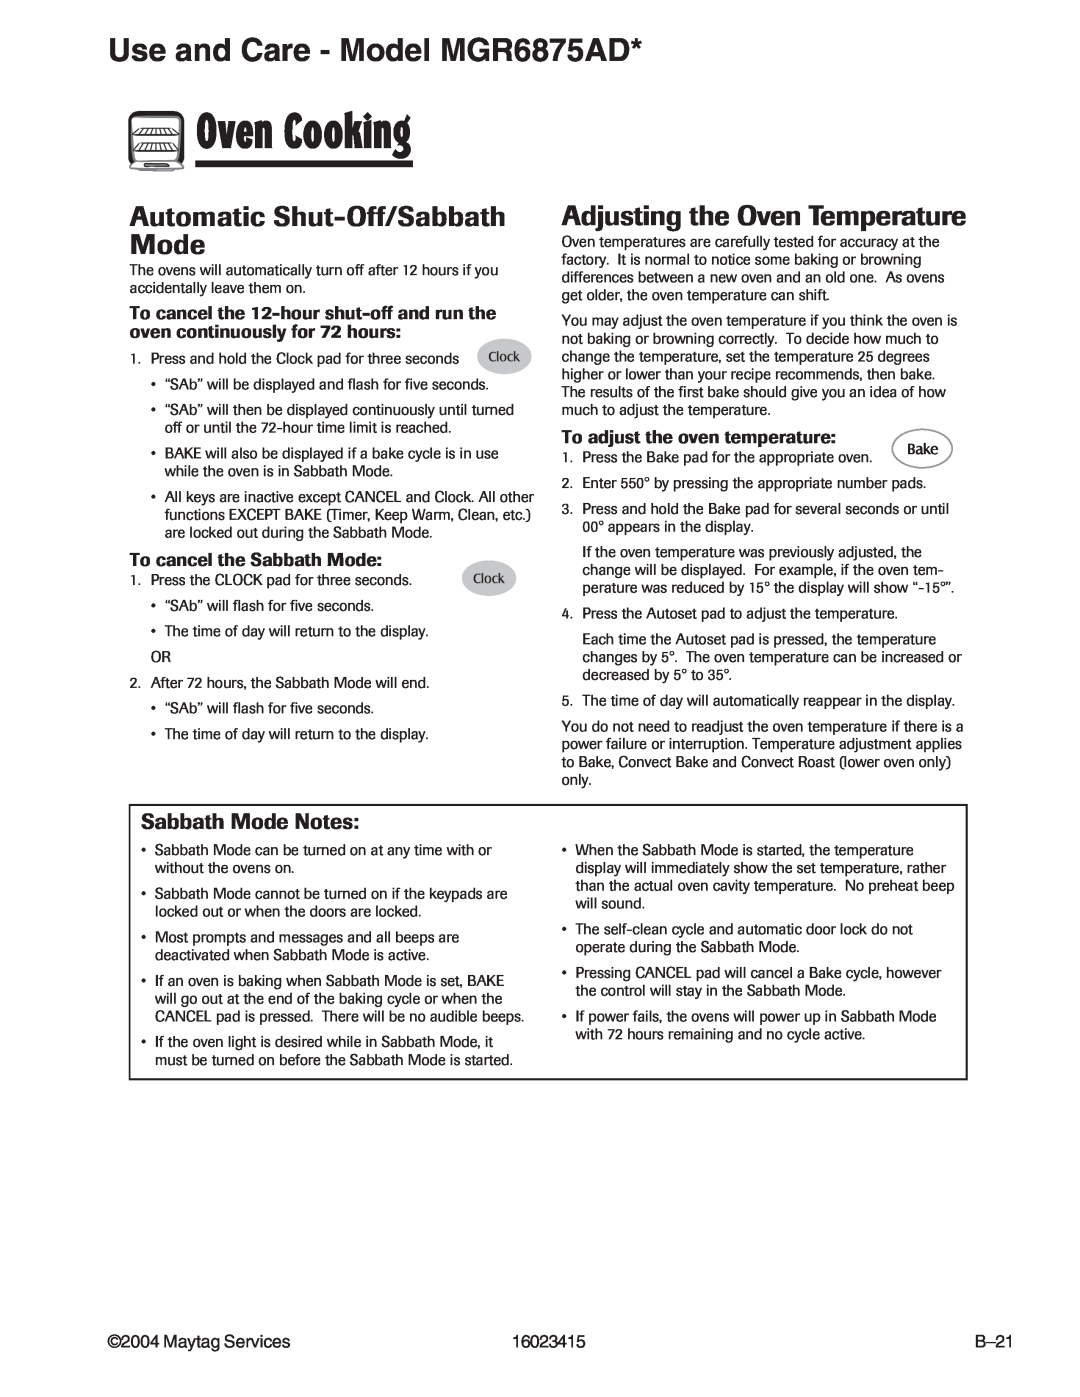 Maytag MGR6775ADB/Q/S/W Sabbath Mode Notes, Oven Cooking, Use and Care - Model MGR6875AD, Automatic Shut-Off/SabbathMode 